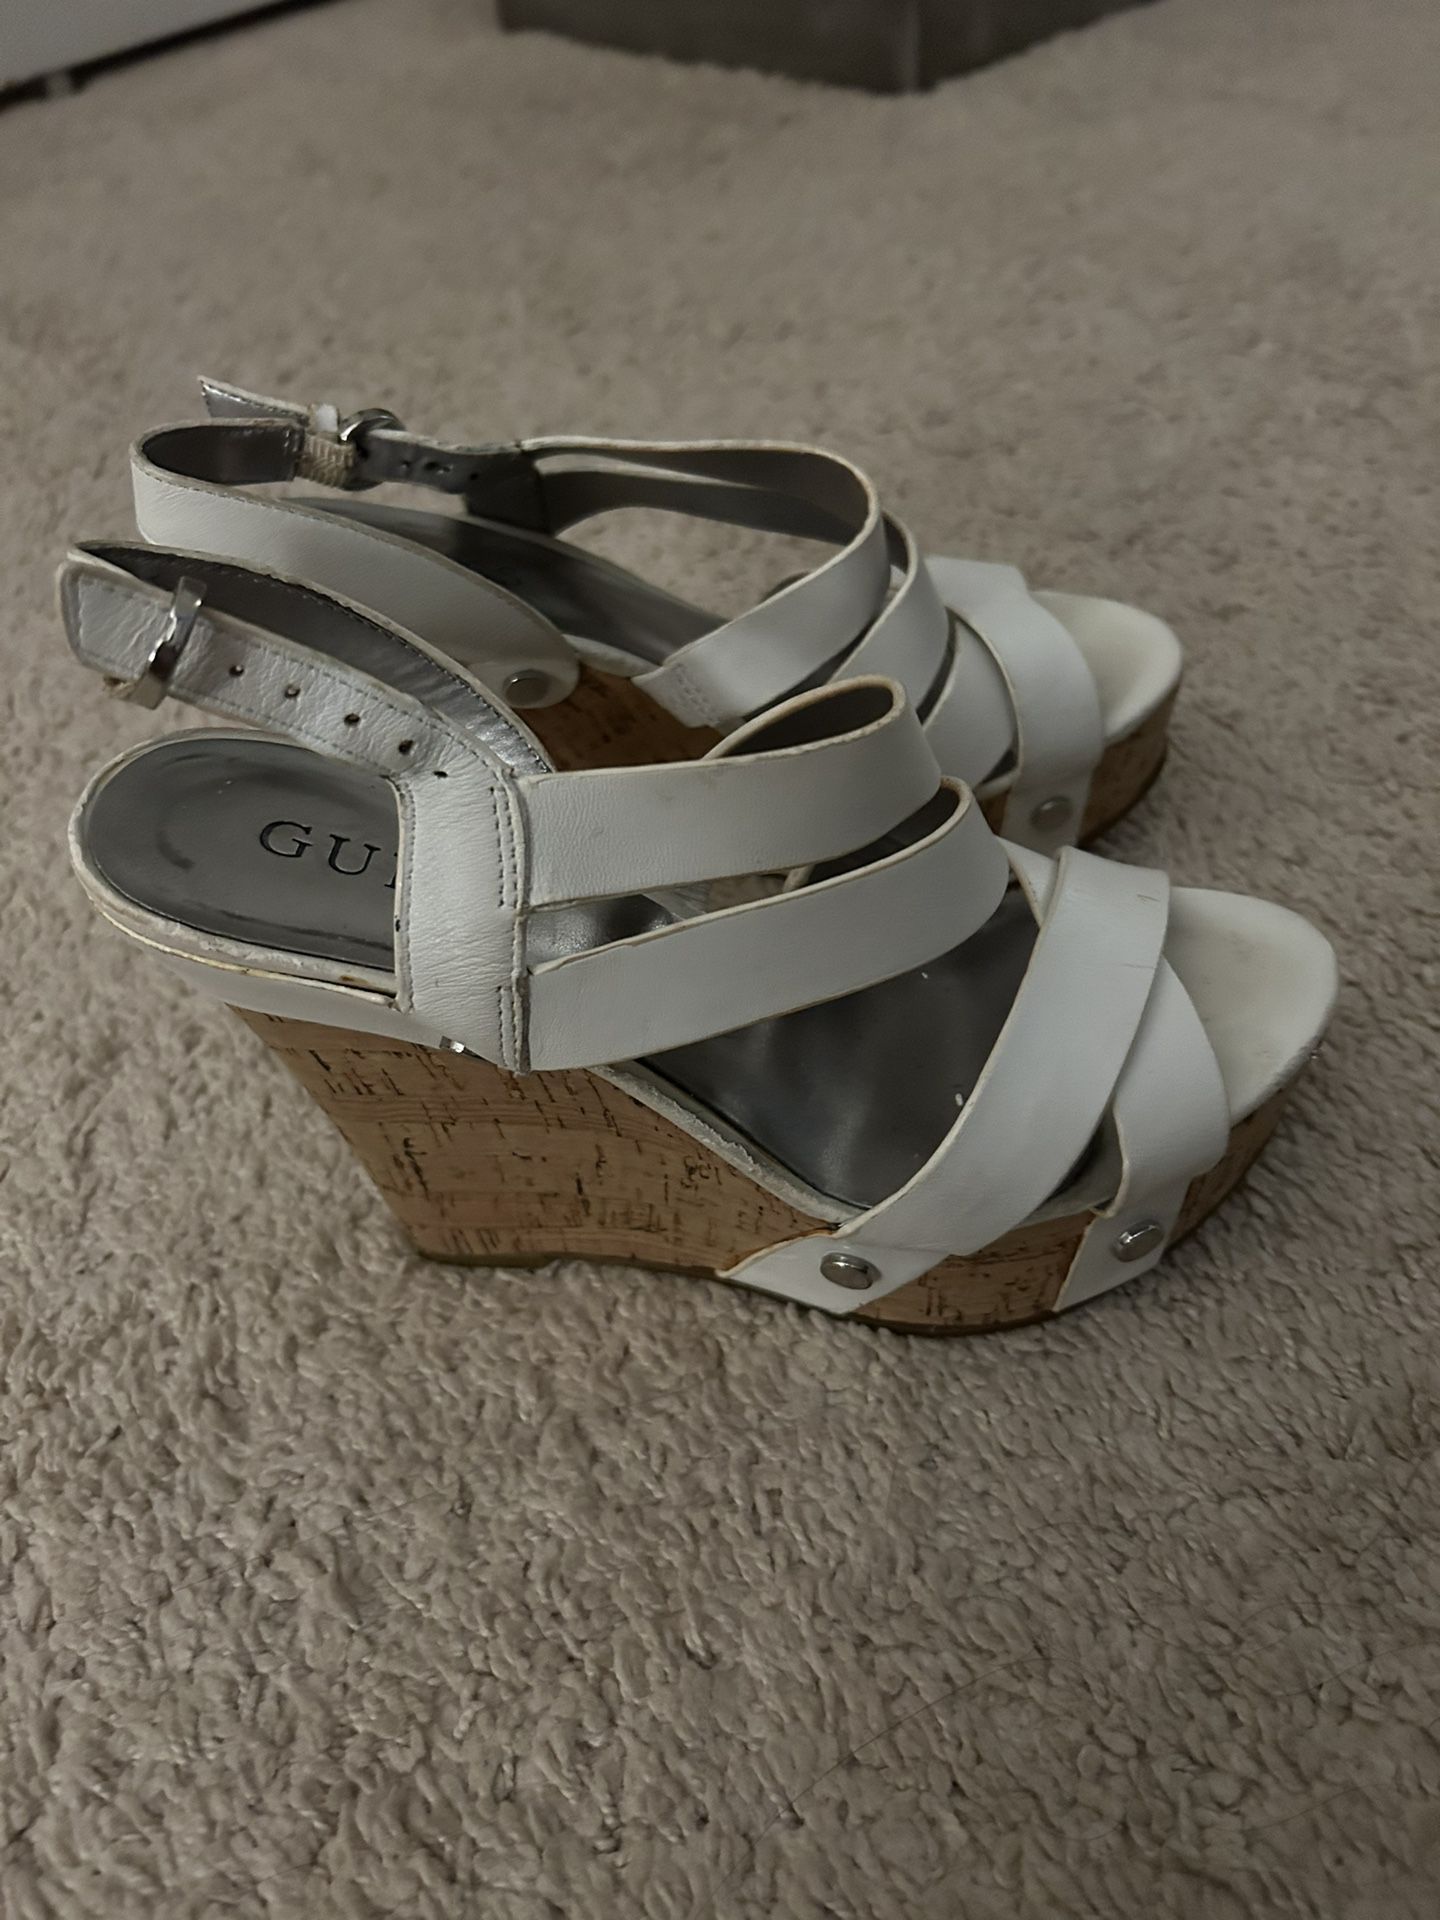 White Wedge Guess Scrappy Sandals Size 6